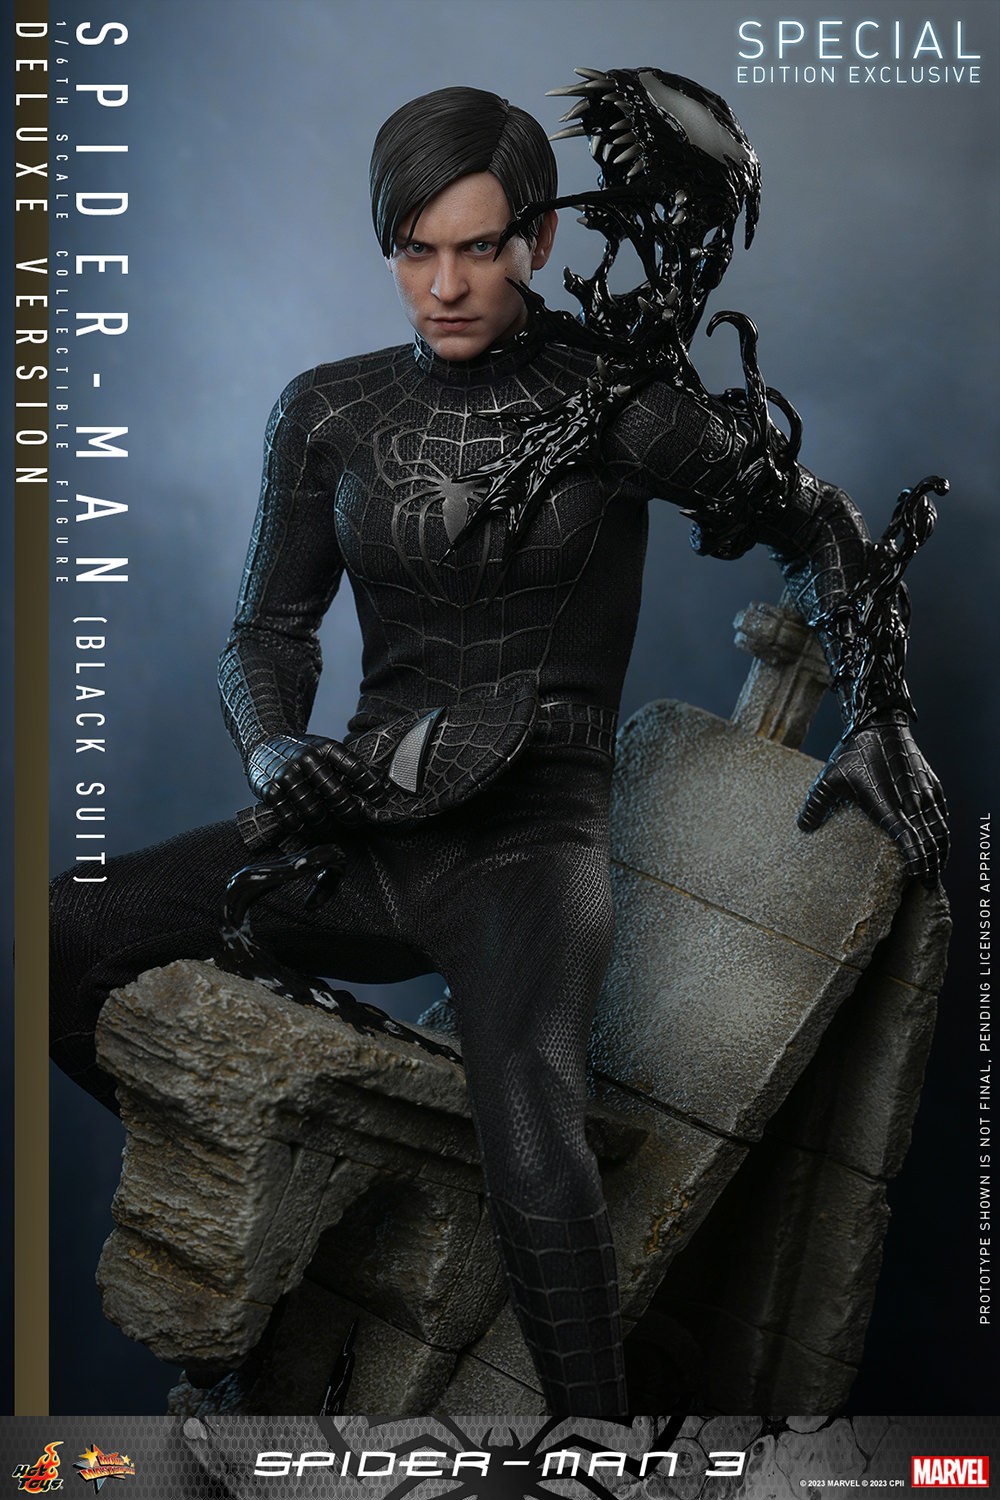 Spider-Man (Black Suit) (Deluxe Version) (Special Edition) (Prototype Shown) View 1